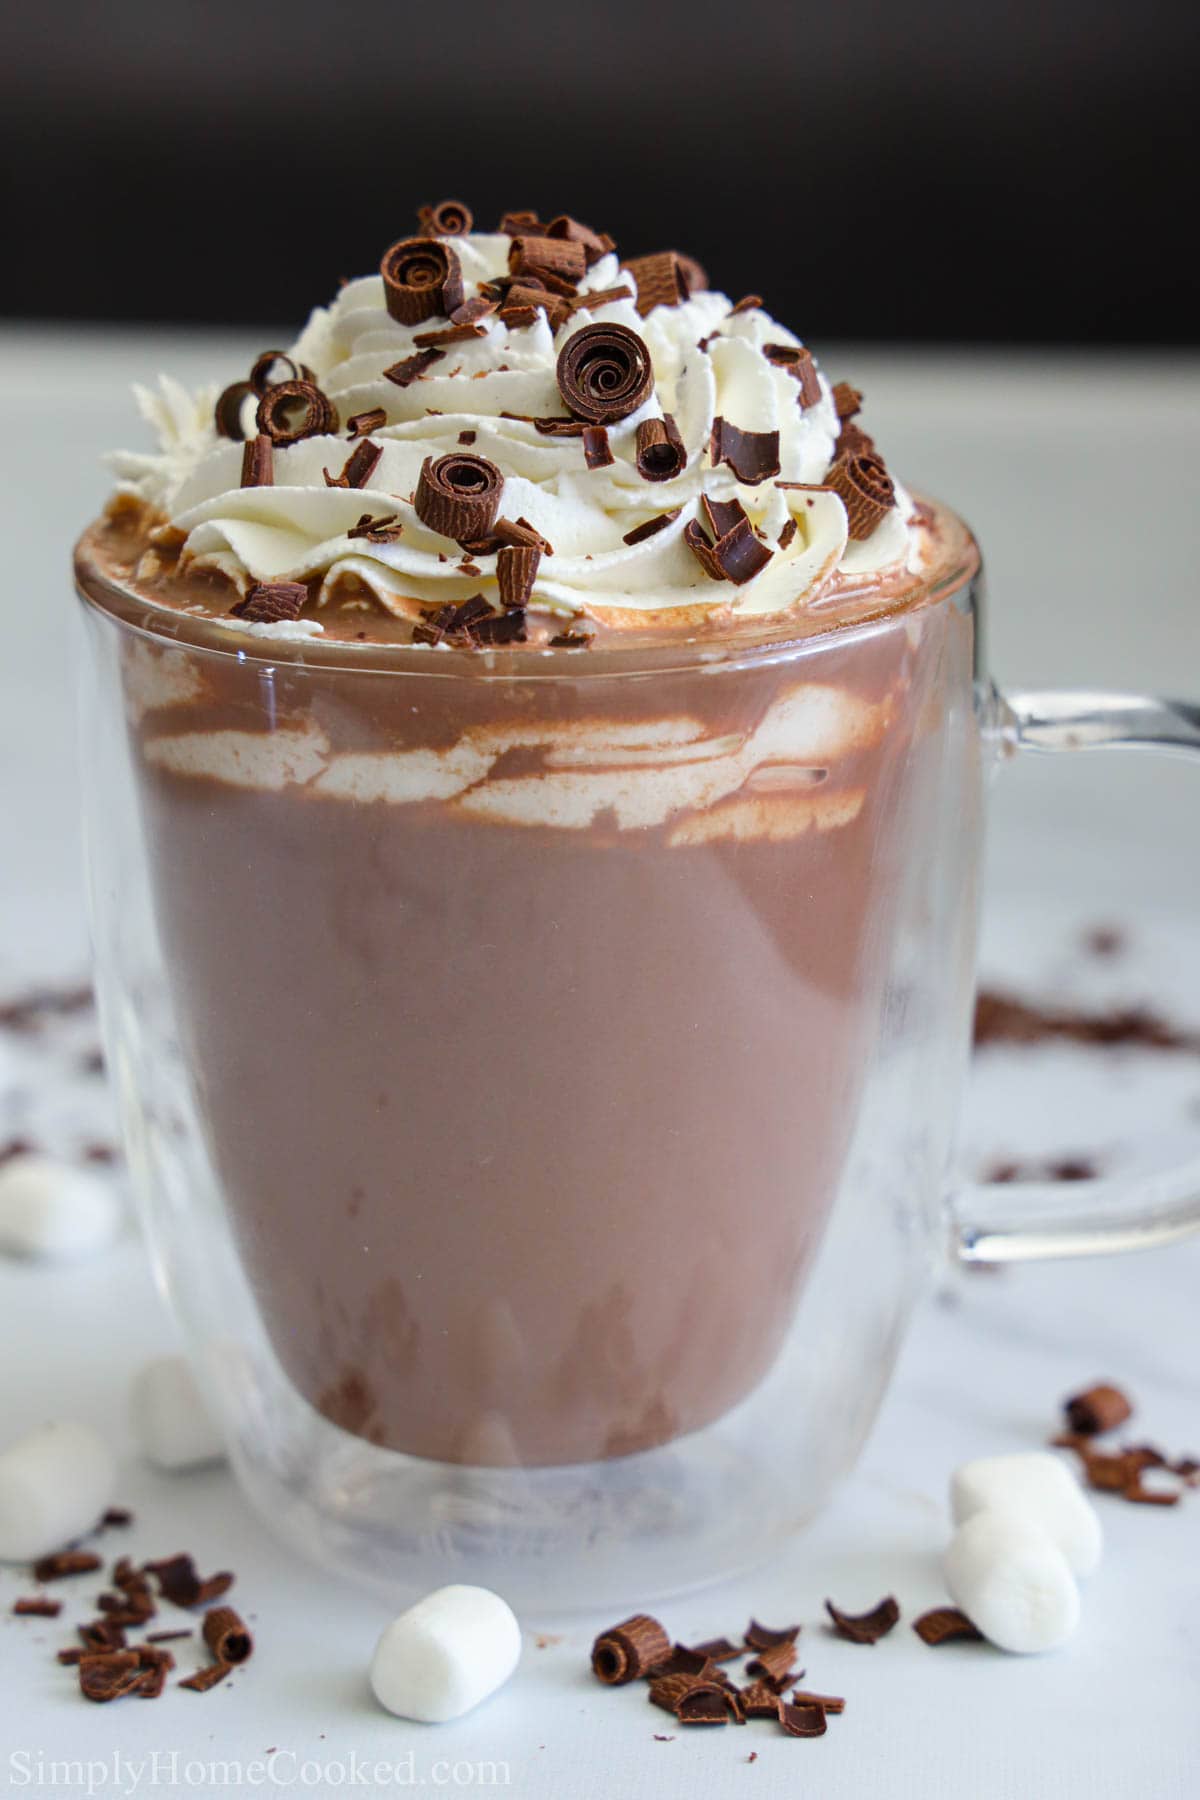 Vertical image of Hot Chocolate in a glass mug with whipped cream and chocolate shavings on top